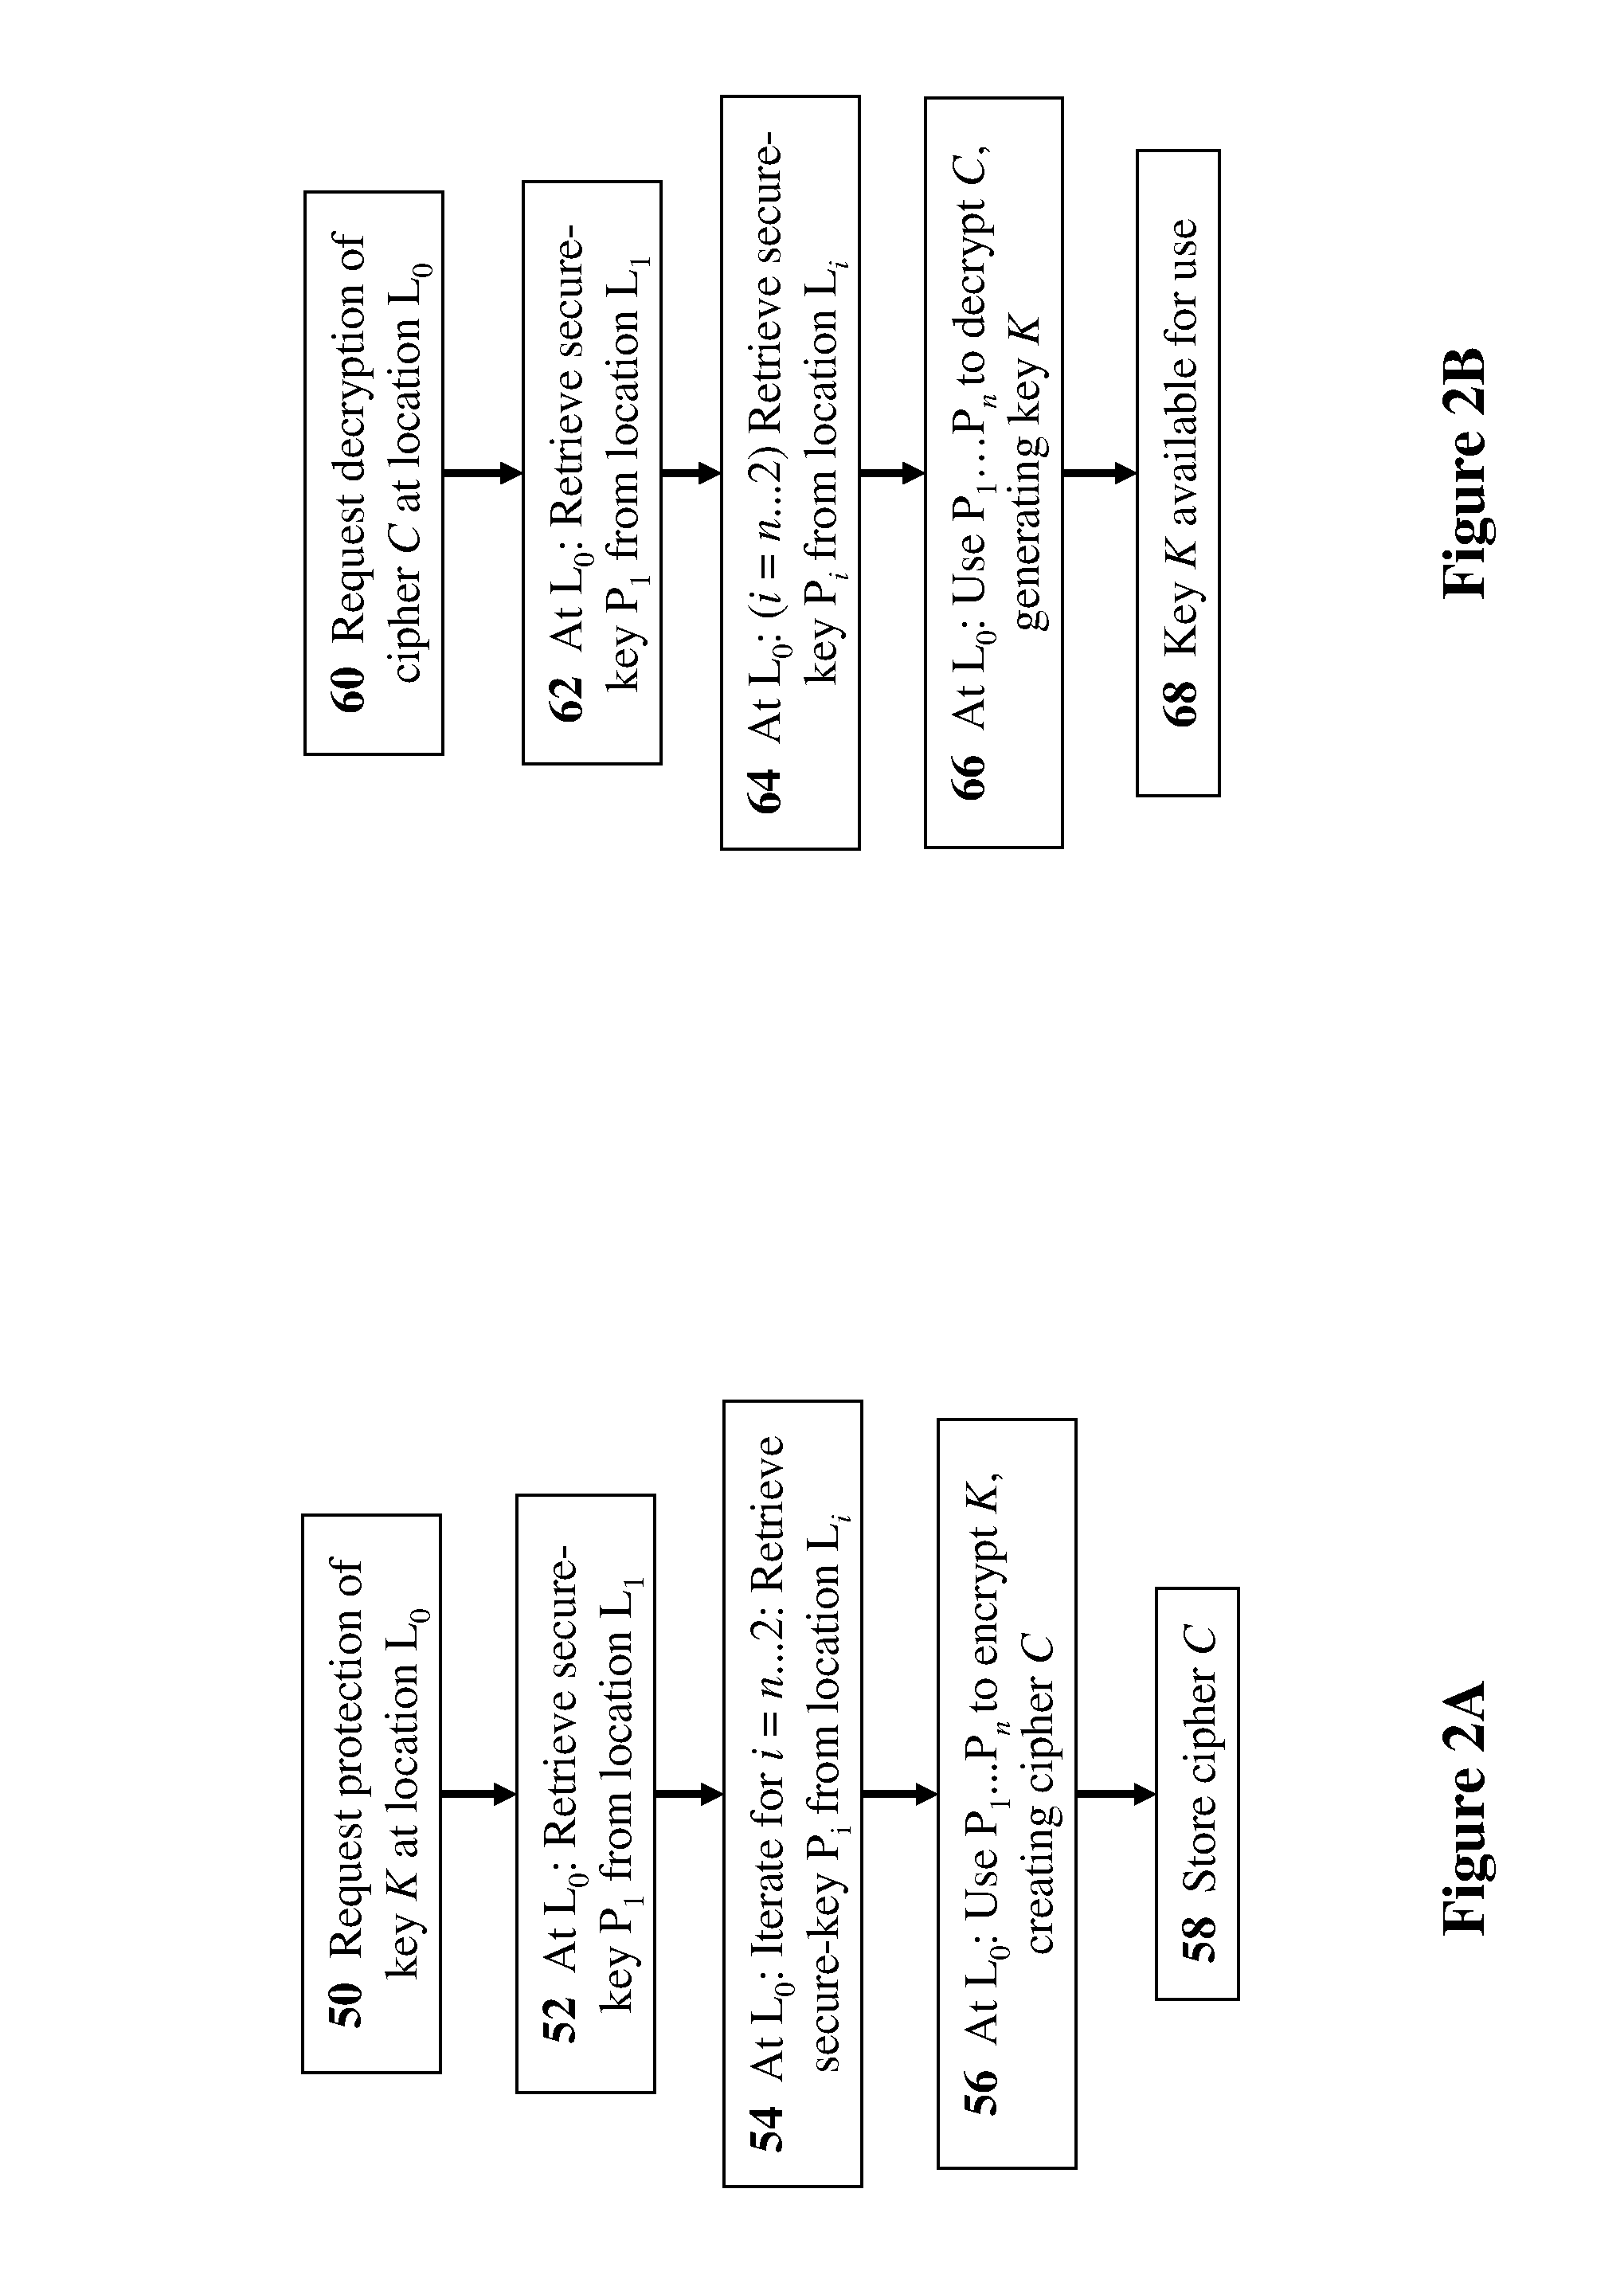 Methods, devices, and media for secure key management in a non-secured, distributed, virtualized environment with applications to cloud-computing security and management